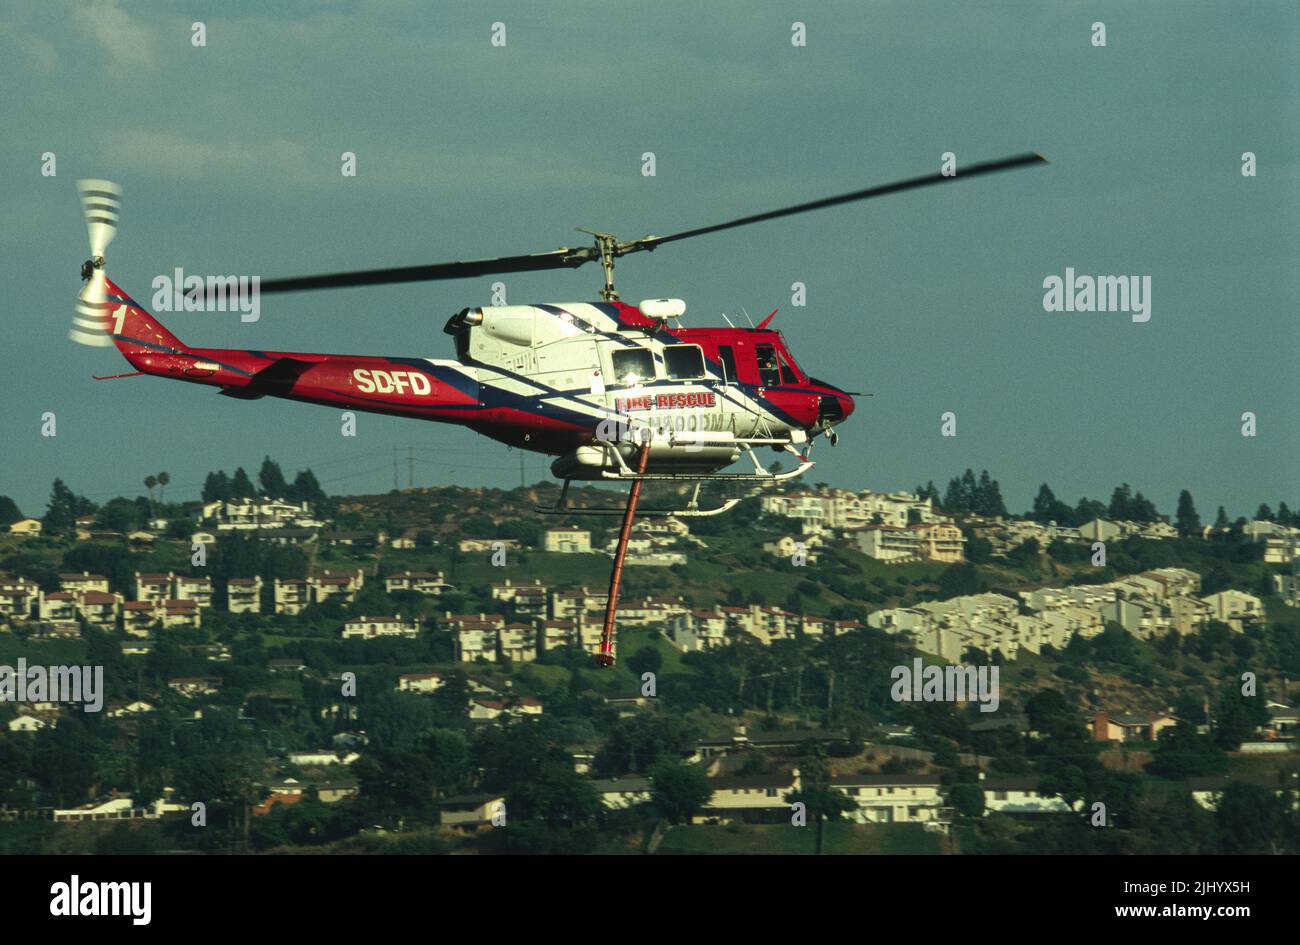 San Diego Fire-Rescue Copter 1 in flight over San Diego Stock Photo